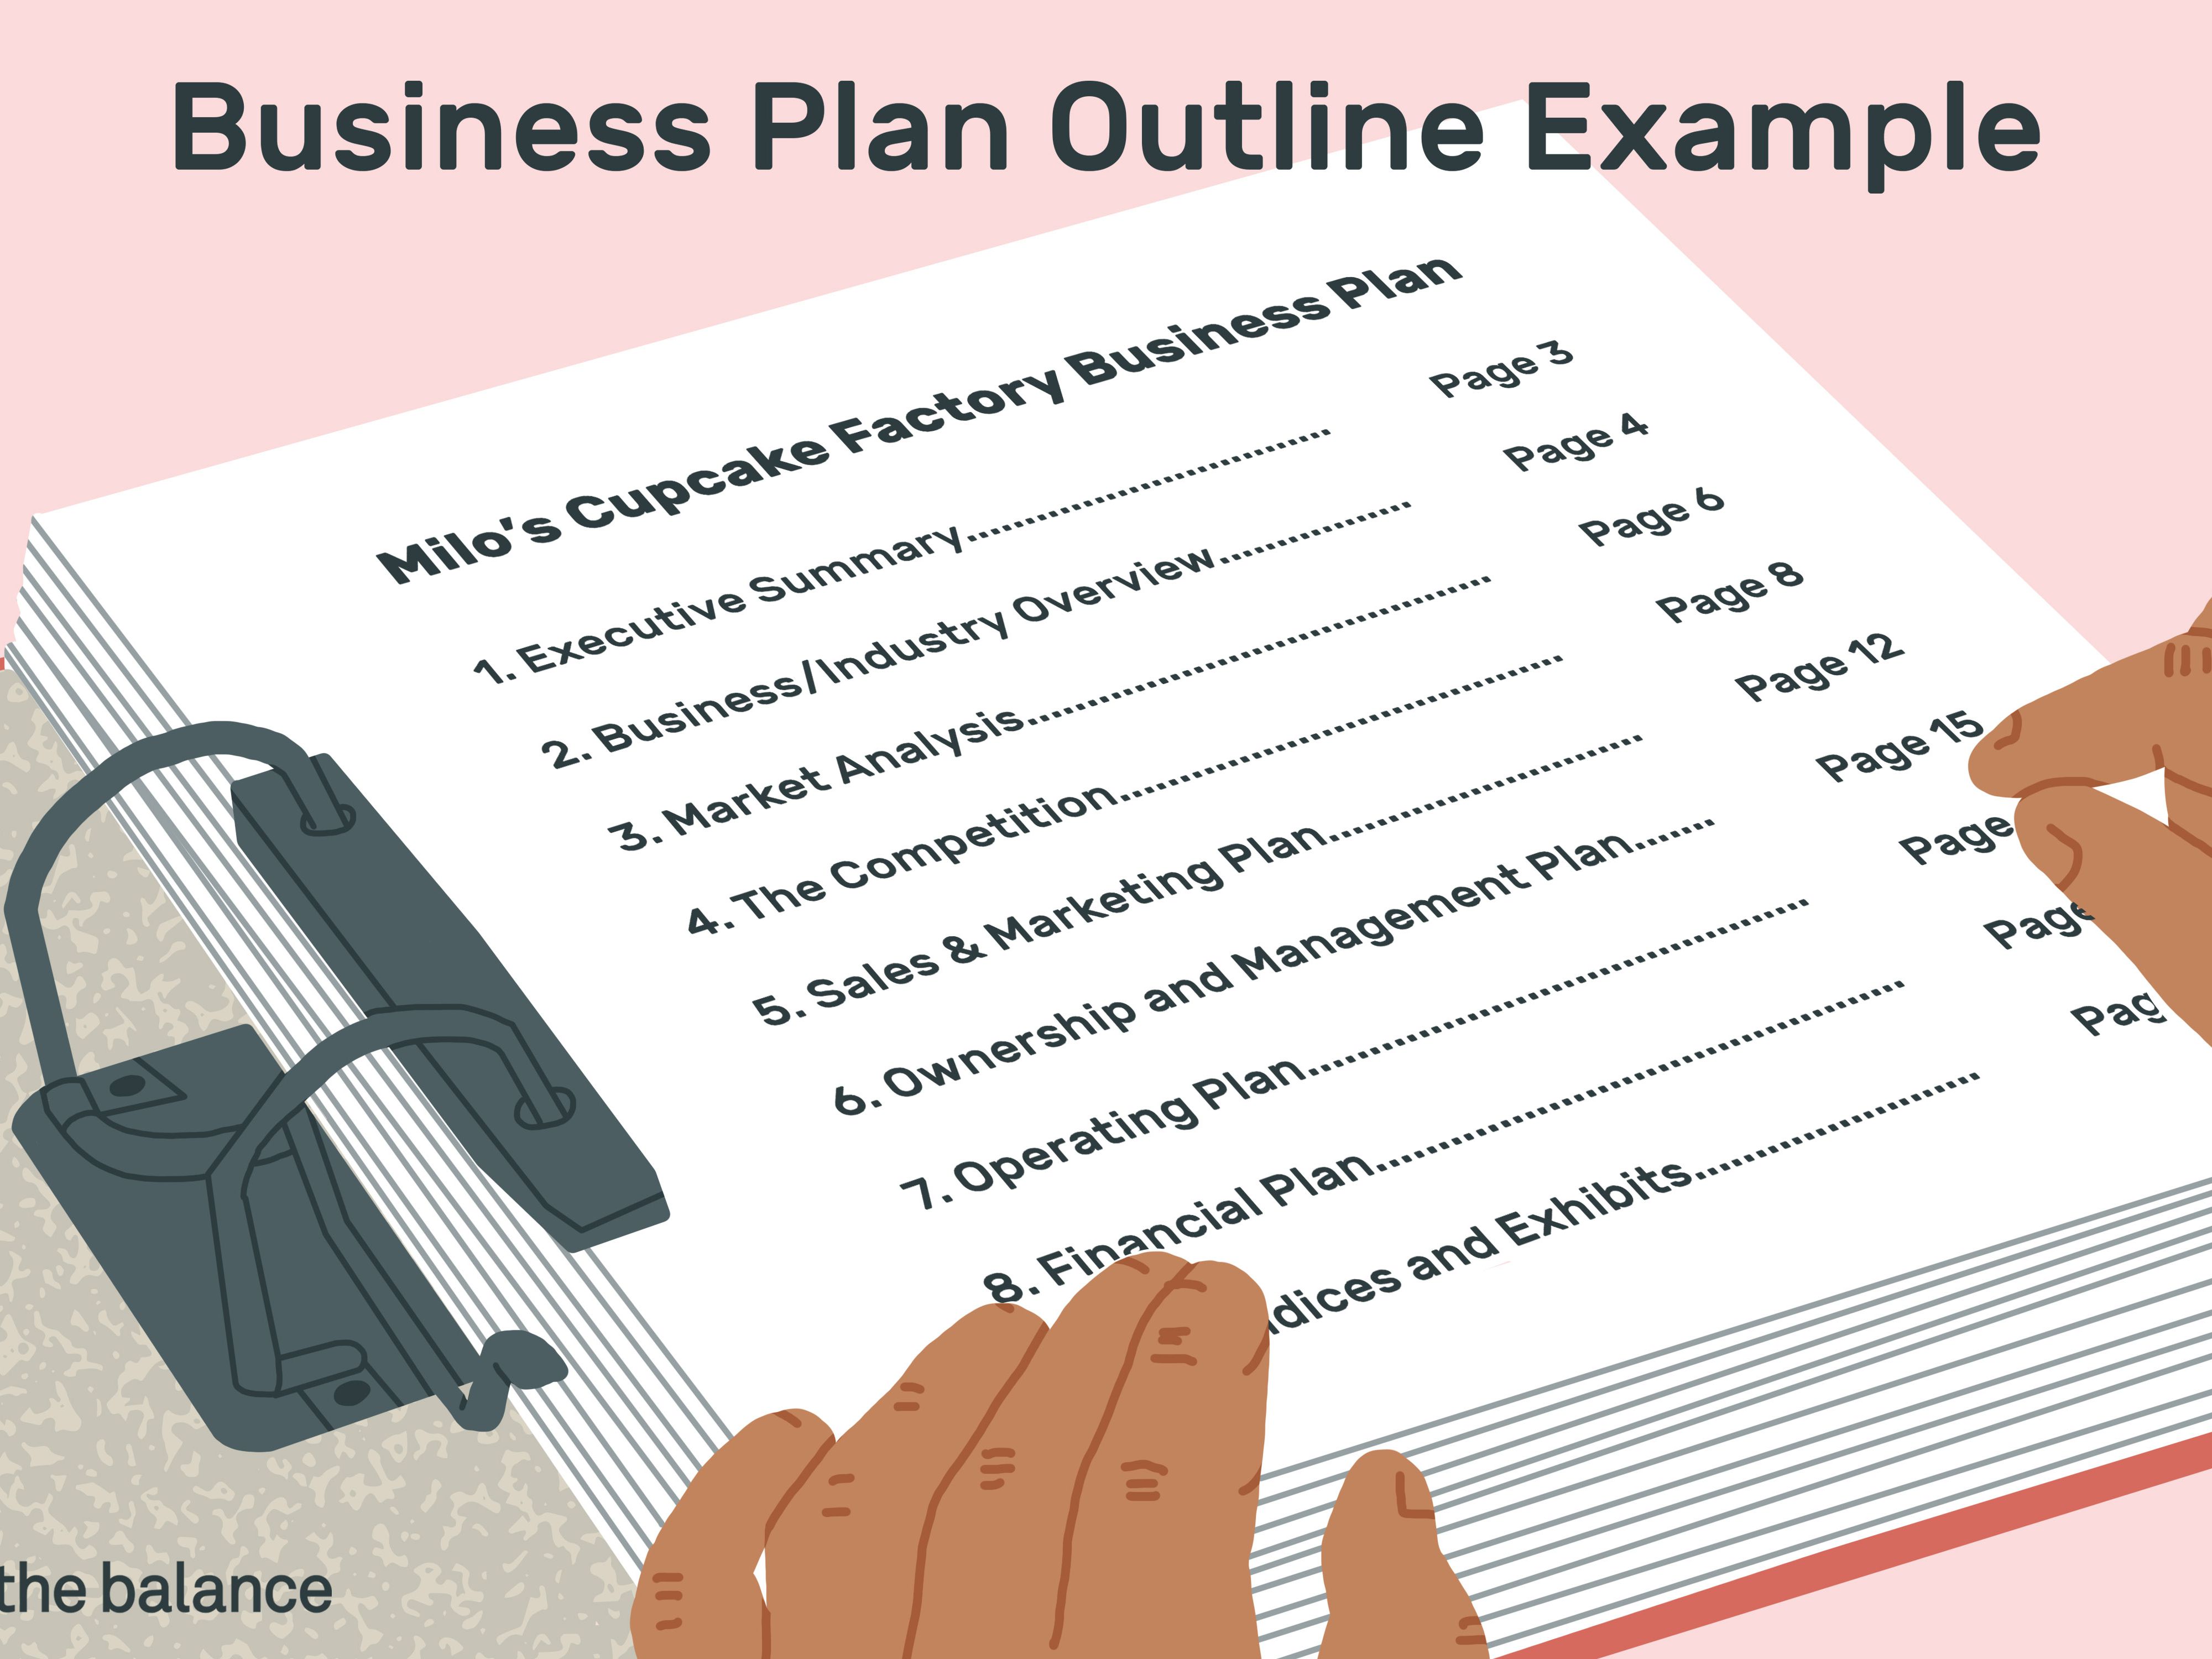 before creating a business plan an entrepreneur must research quizlet